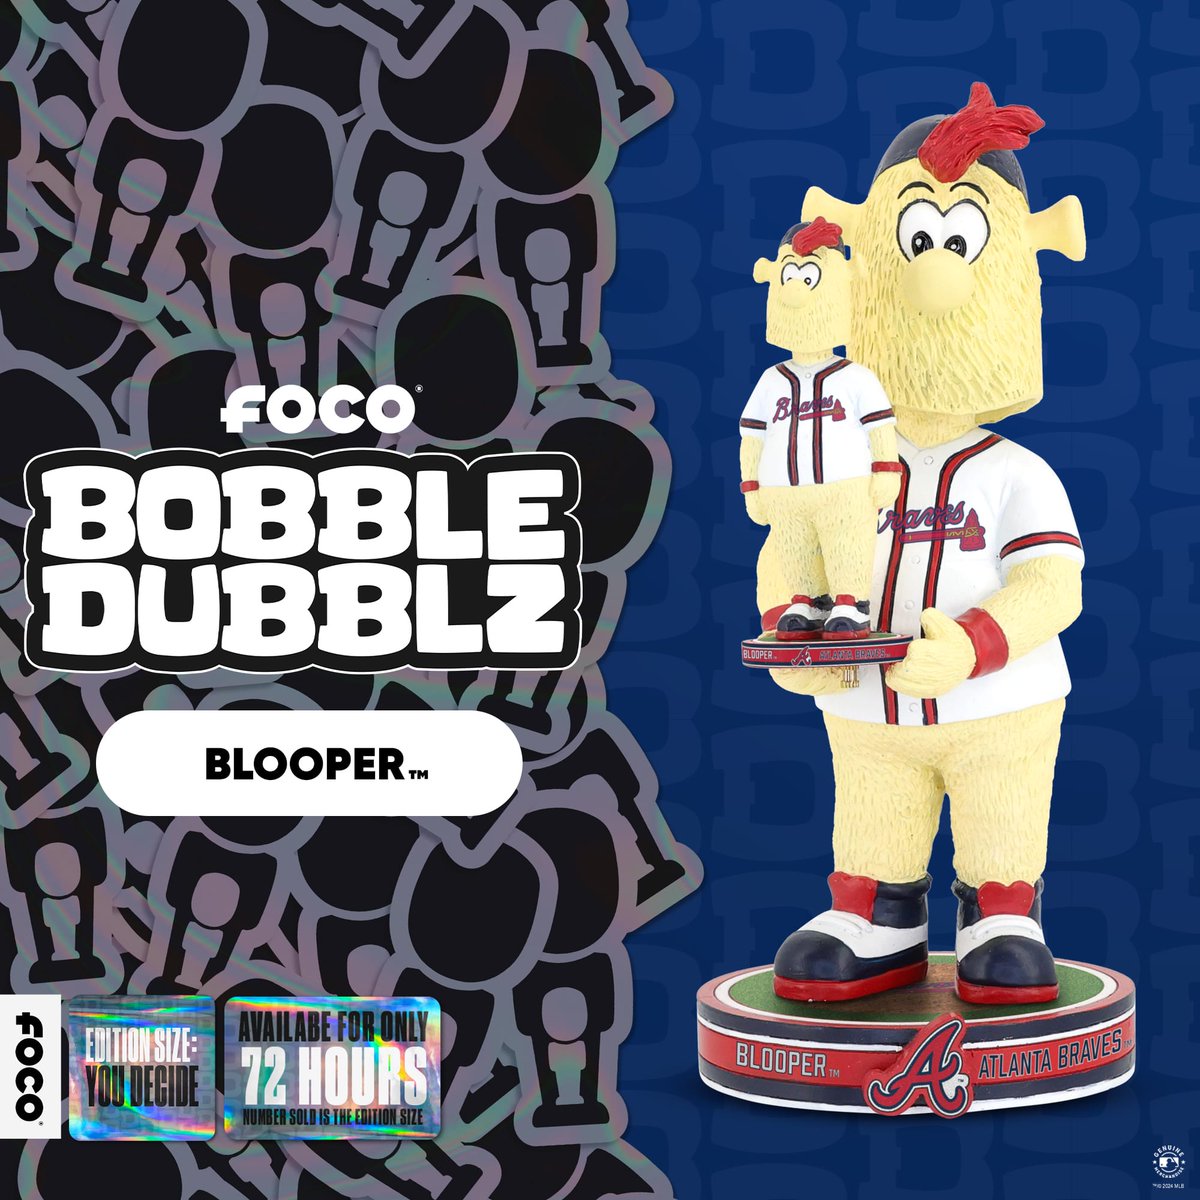 🚨 GIVEAWAY 🚨 We’re partnering with @FOCOusa to giveaway one of these limited-edition Blooper Bobble Dubblz Bobbleheads! It's only available to buy for the next 24 hours! TO ENTER:

1. Repost
2. Follow @680TheFan, @FOCOusa, and @focobobbles 
3. Comment 1 word to describe Blooper